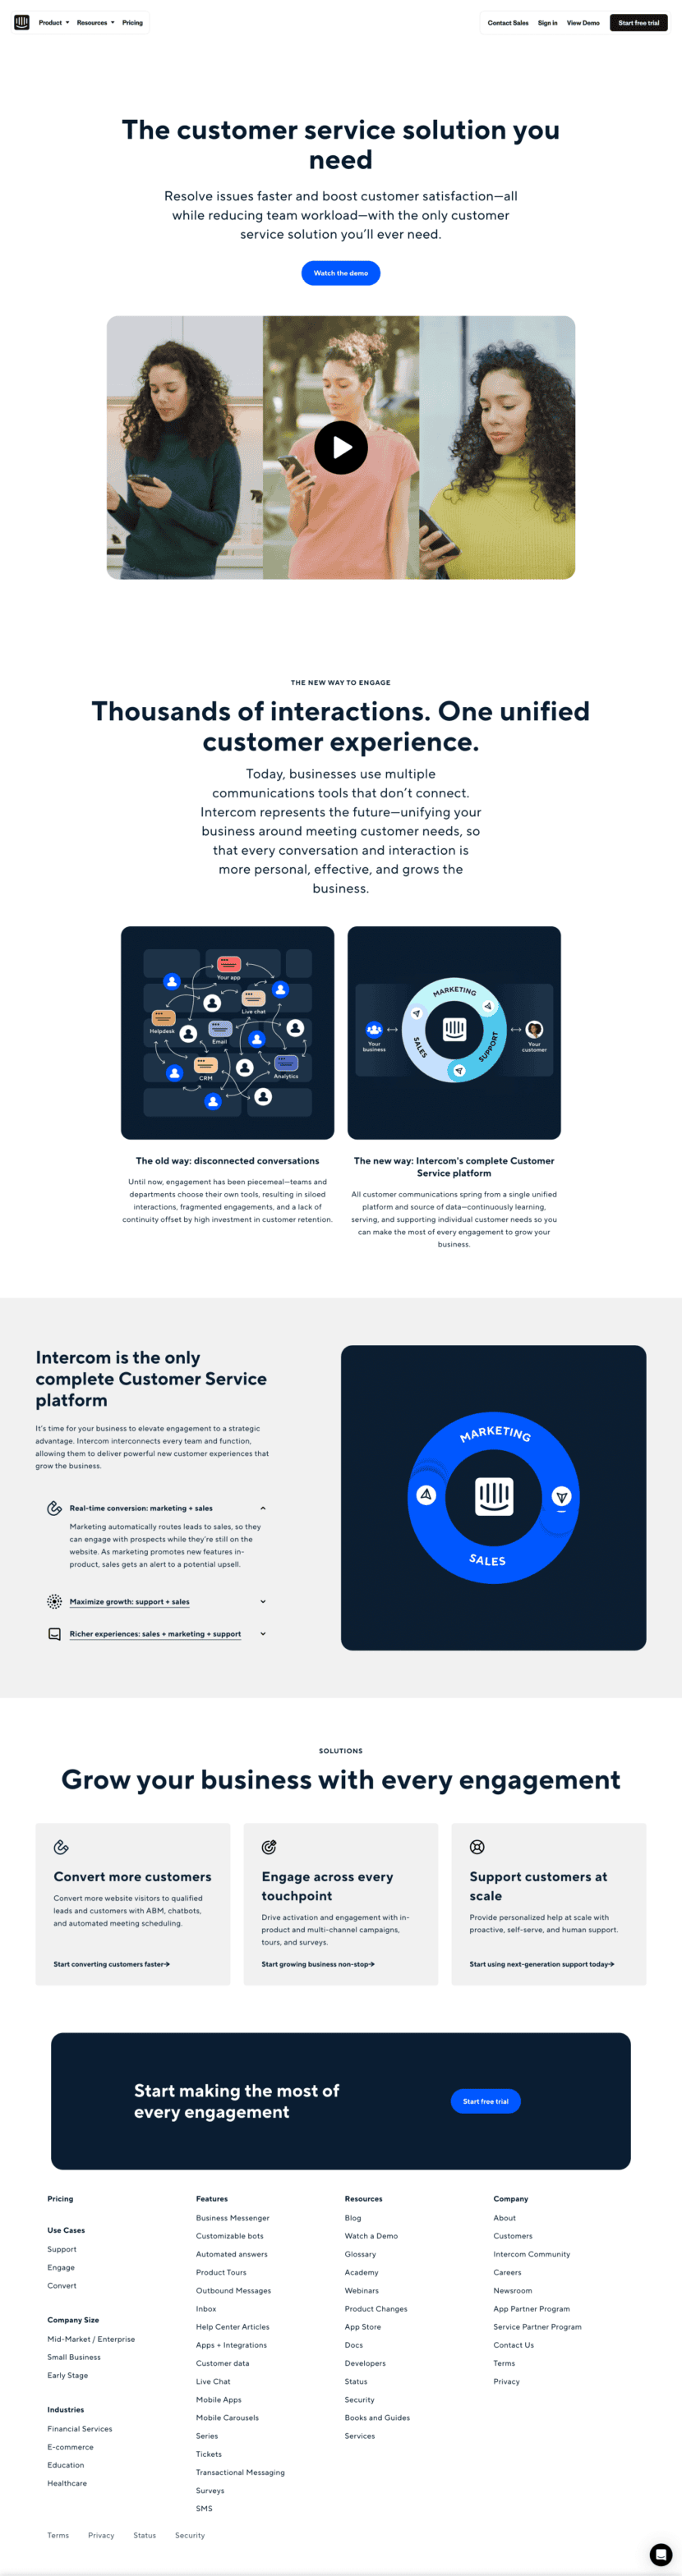 intercom-features-page